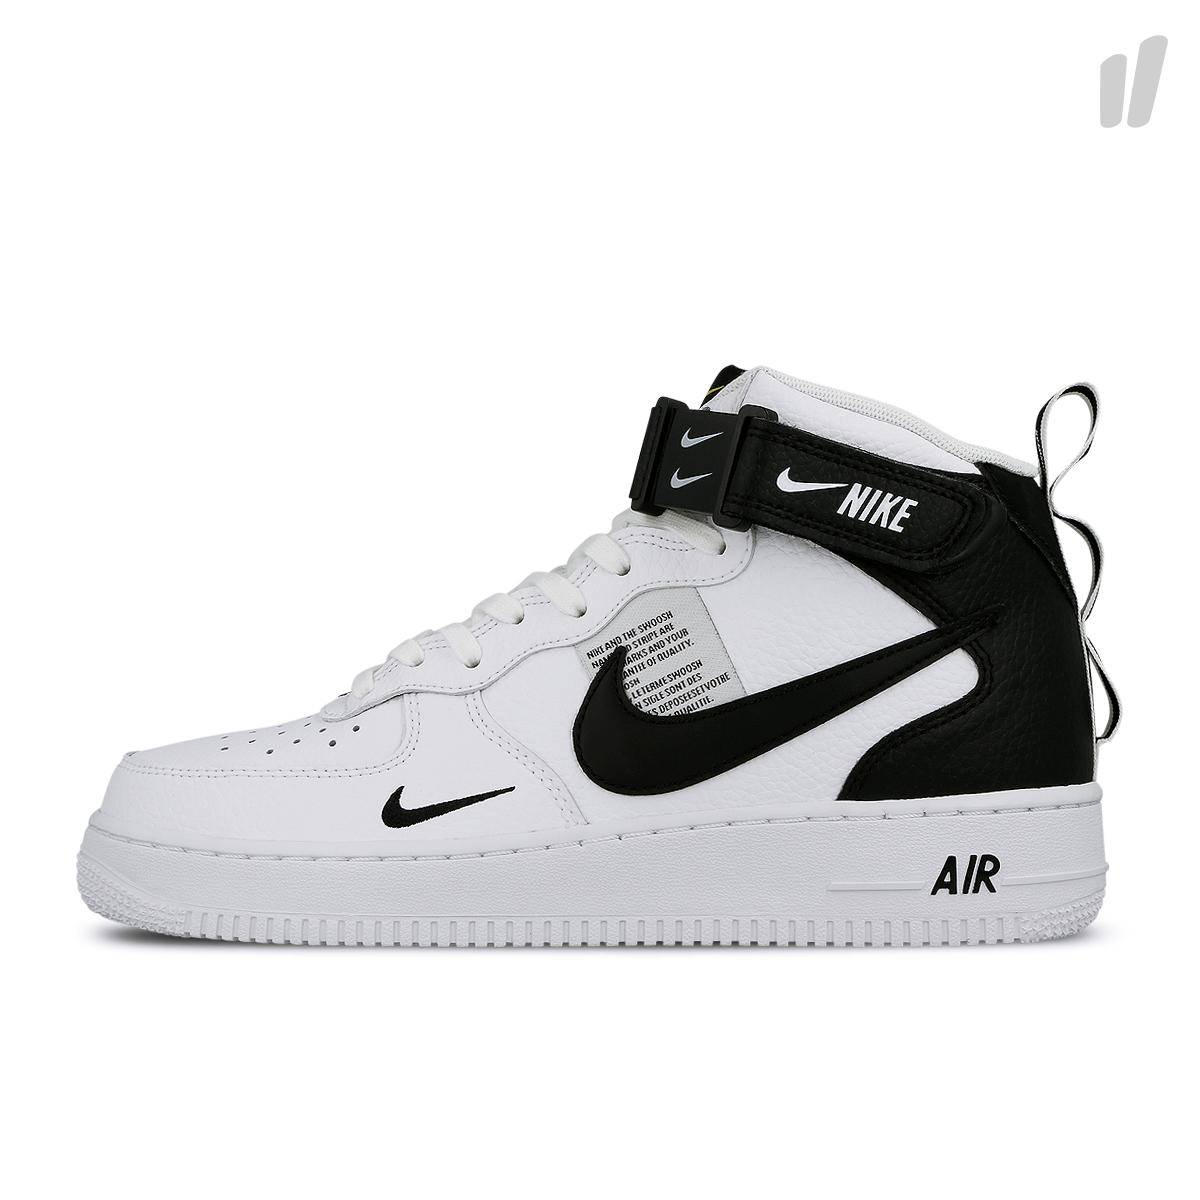 Nike Air Force 1 Mid `07 LV8 (804609-103) - SNEAKER SEARCH